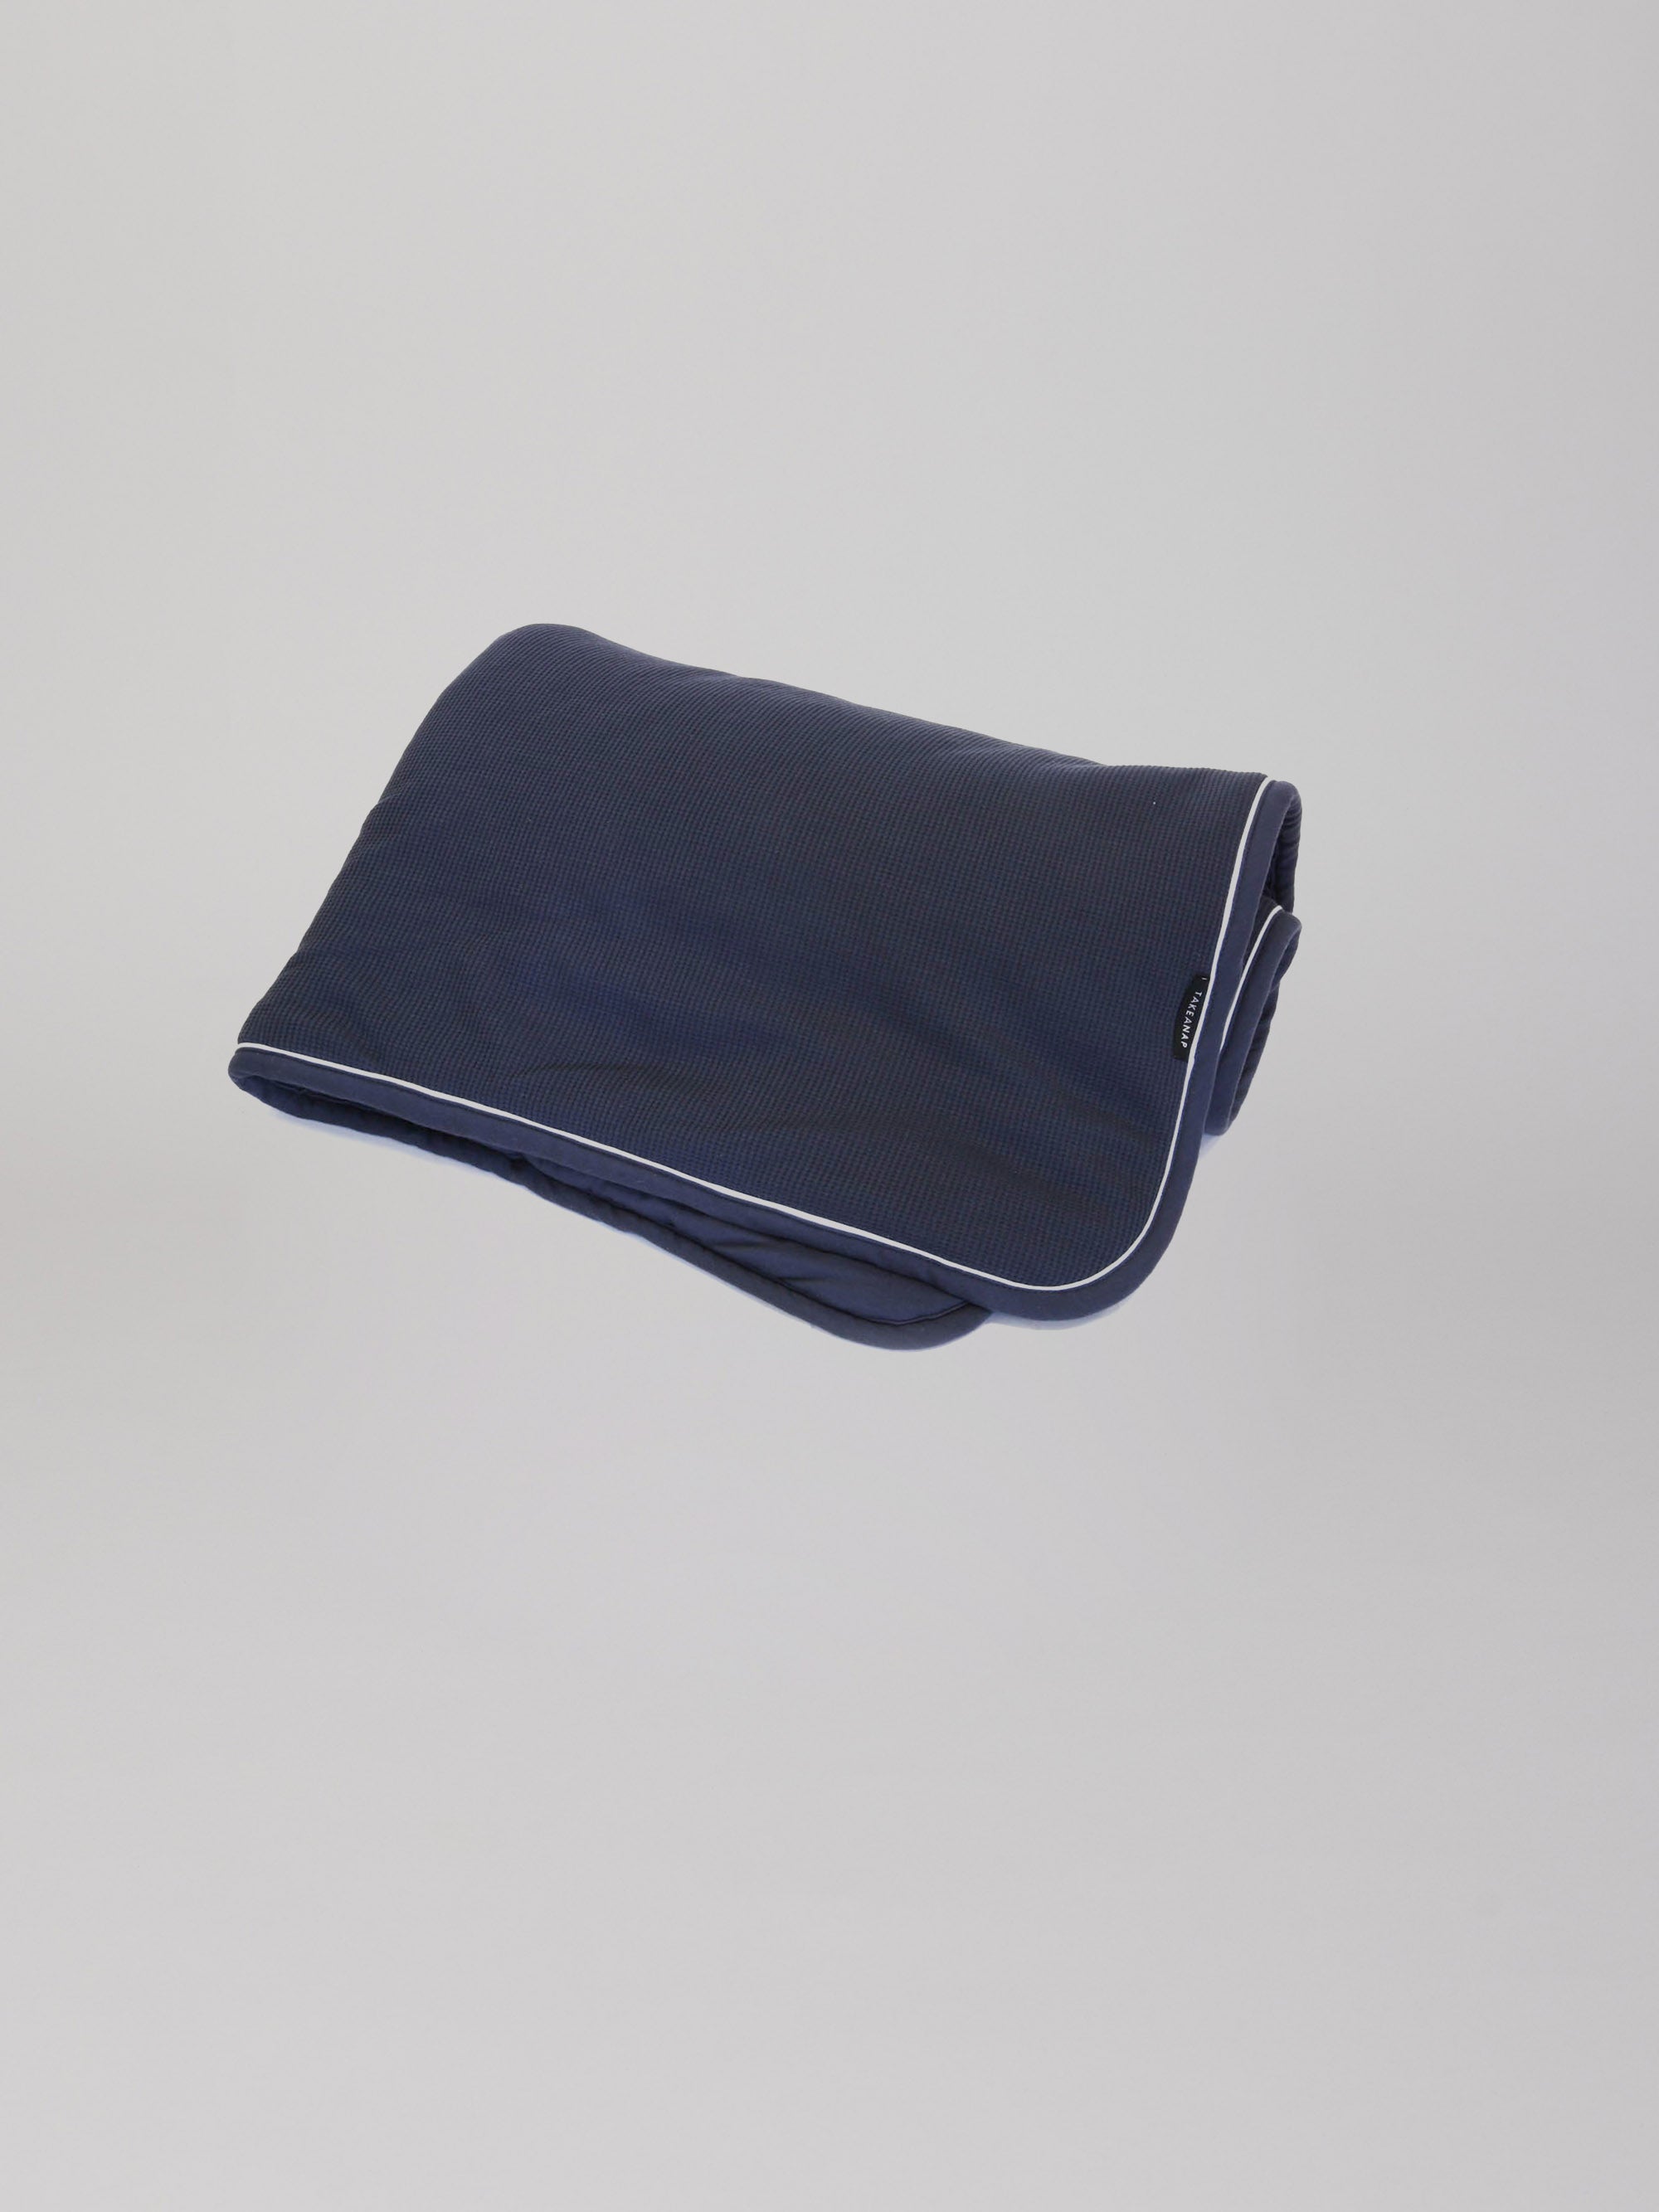 Hey welcome 2 Jersey Blanket SOFT 120 | JACQUARD product page. Image: Jersey Blanket in navy color on a grey background